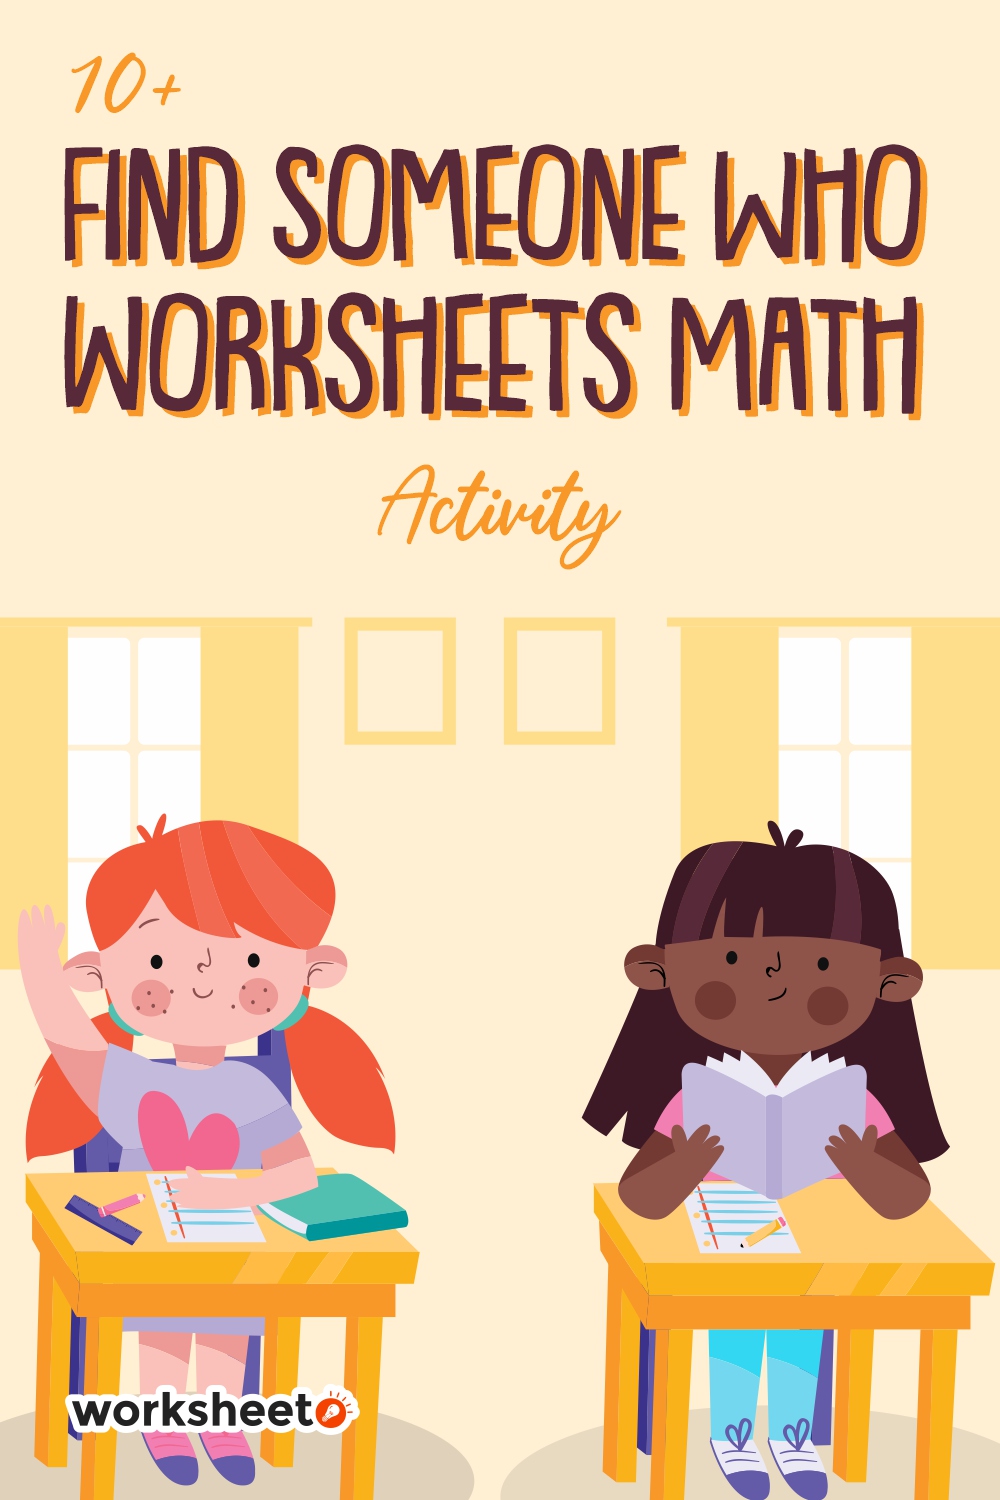 Find Someone Who Worksheets Math Activity